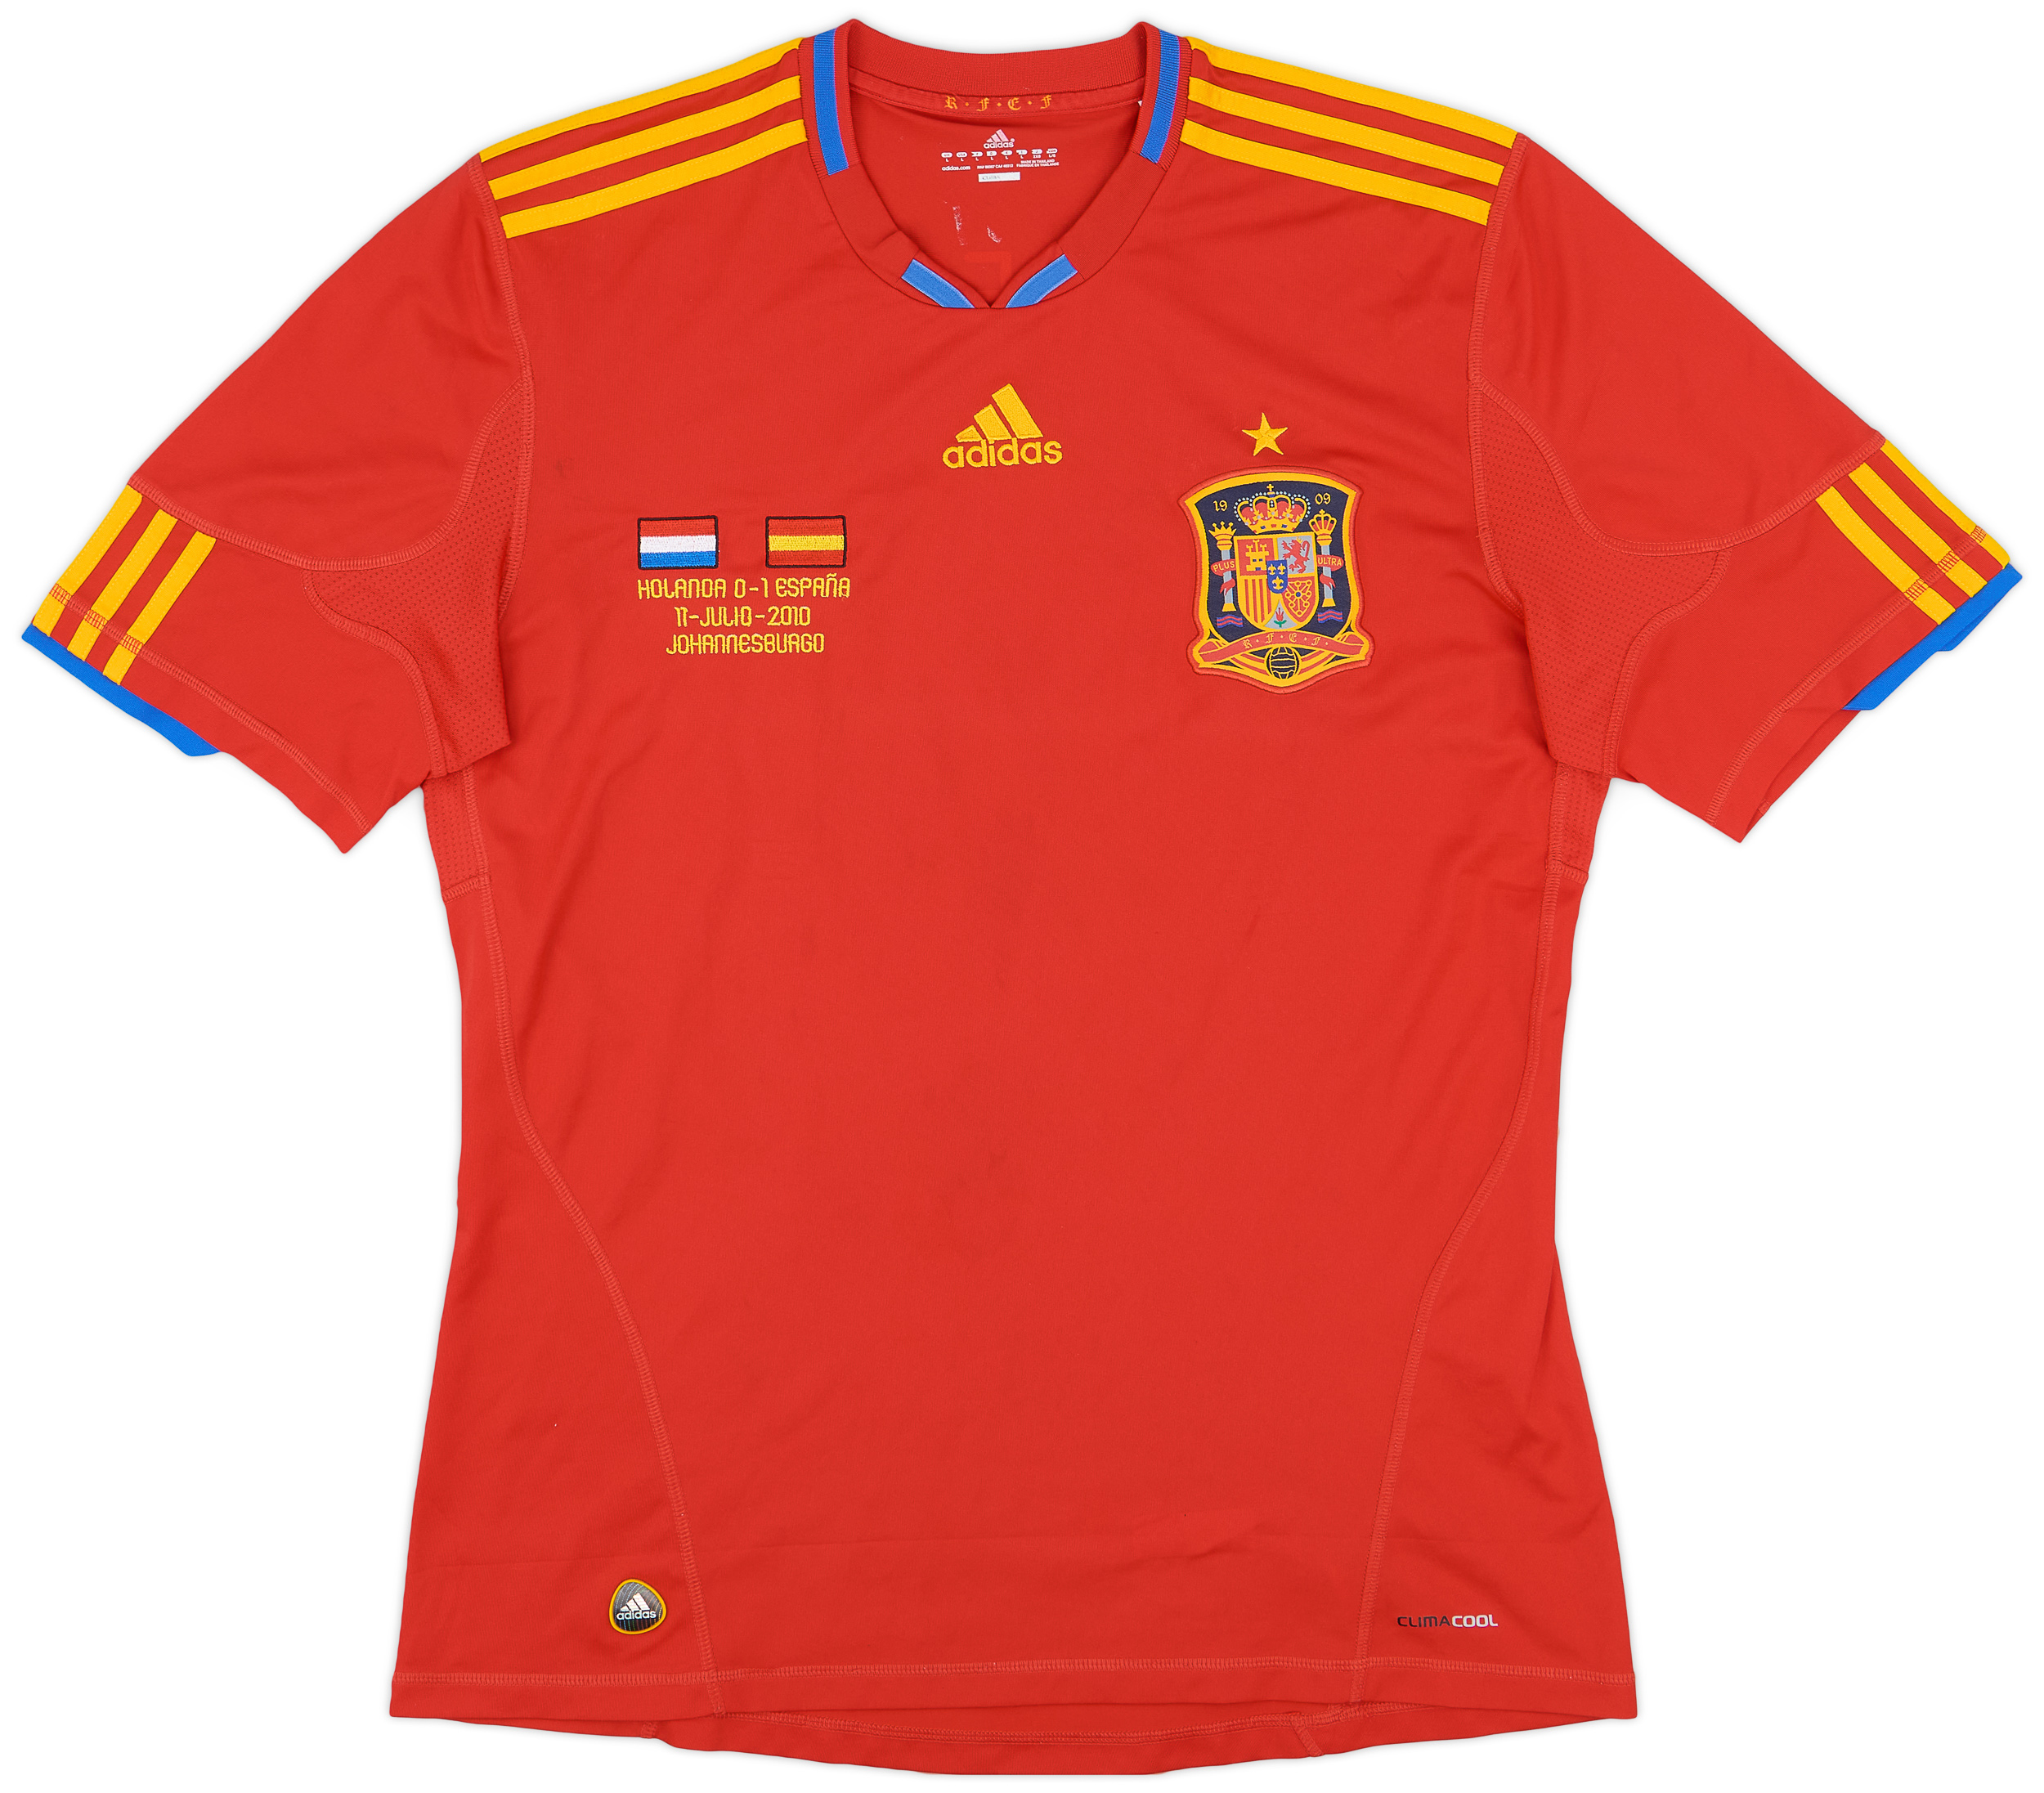 2009-10 Spain Squad Signed Home Shirt - 8/10 - ()